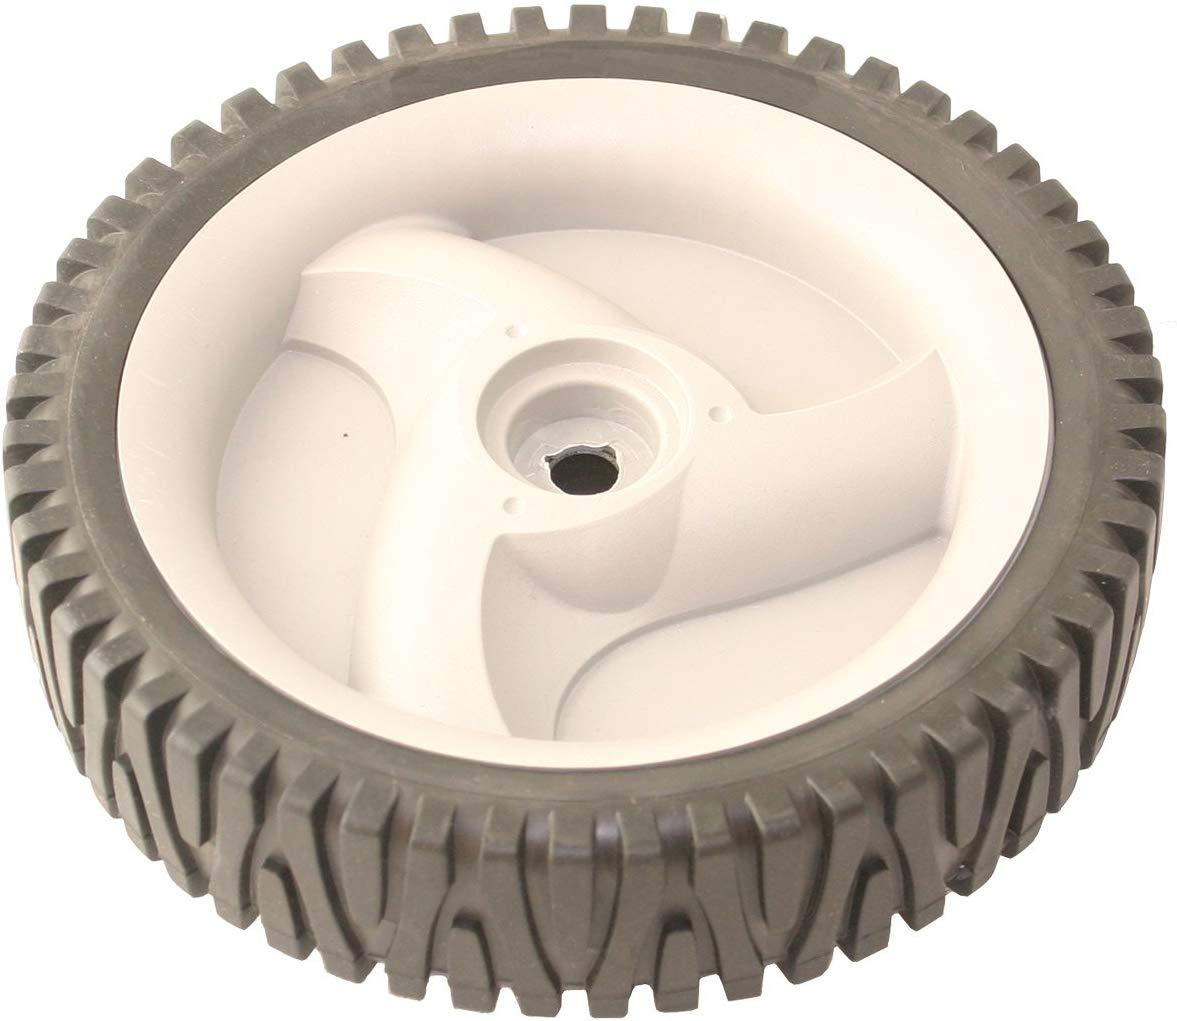 Compatible Wheel for Craftsman 917370651 Lawn Mower – Tools Moito